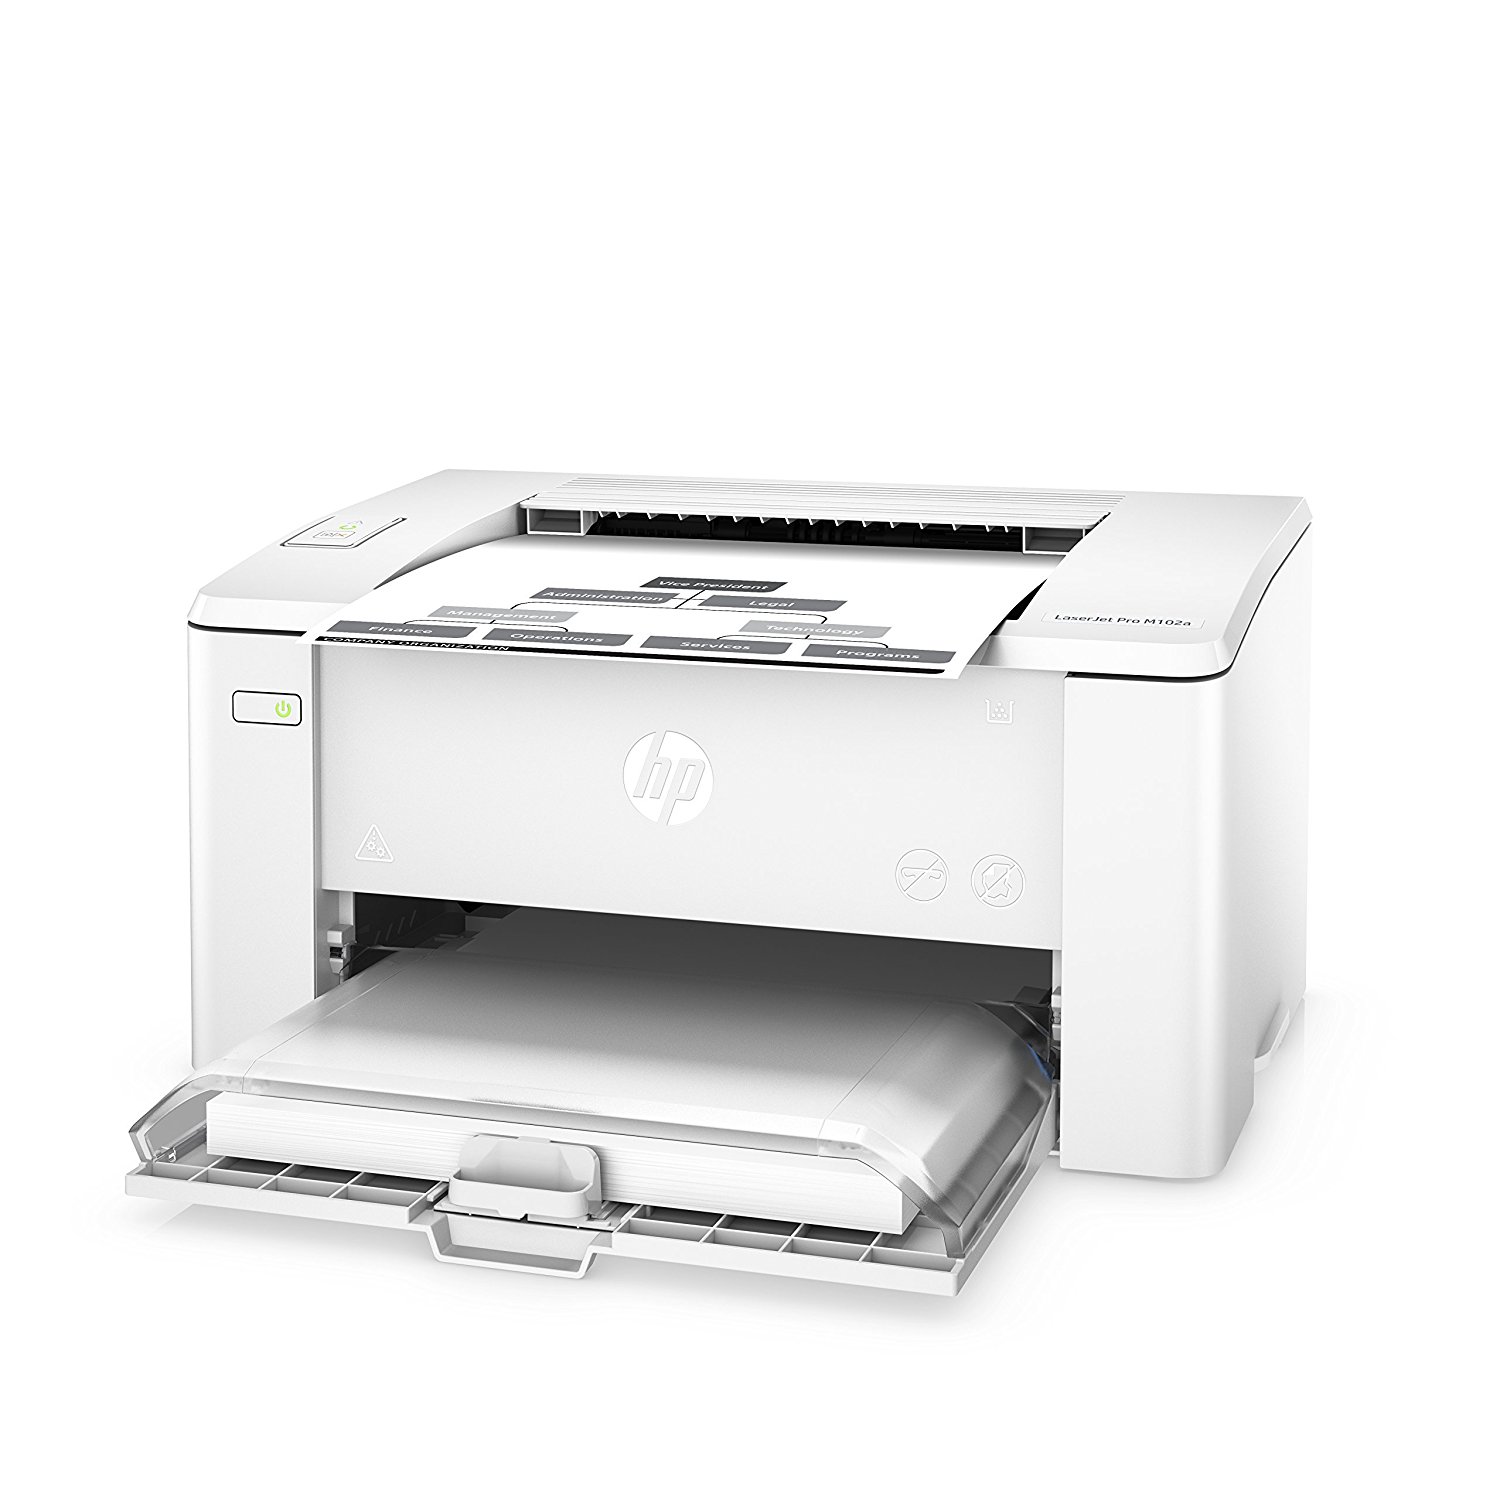 Download Laserjet Pro M102A - Hp Laserjet Pro M102a Driver Download | Printers Driver / Download laserjet pro m102a here when you have troubled with driver.